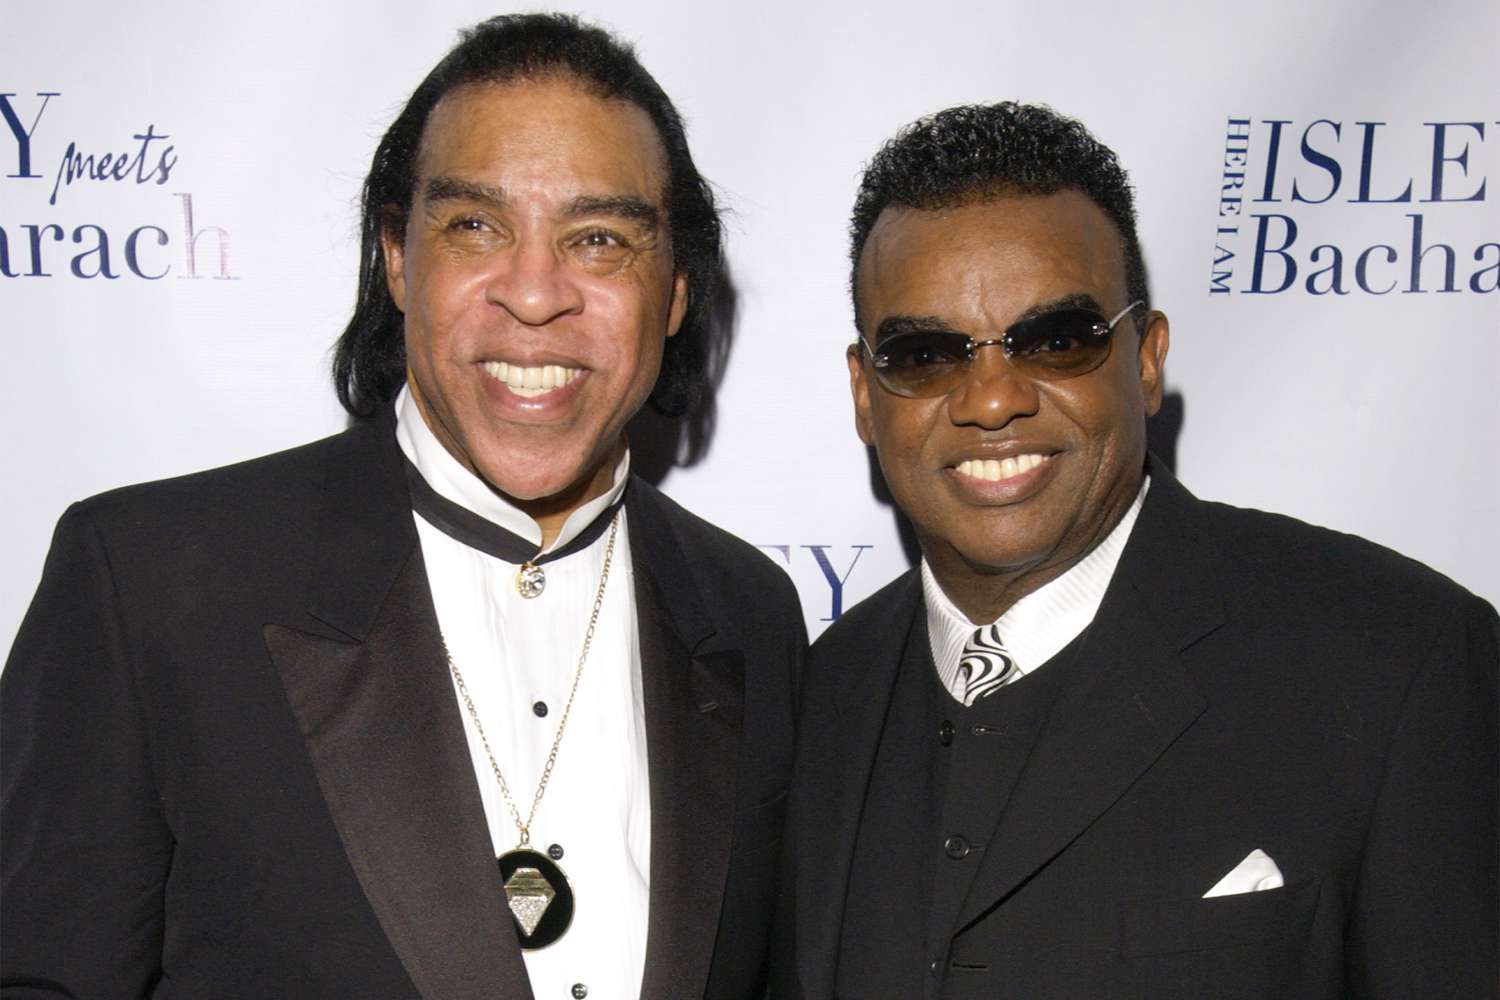 rudolph-isley-of-the-isley-brothers-passes-away-at-84-a-musical-legend-remembered